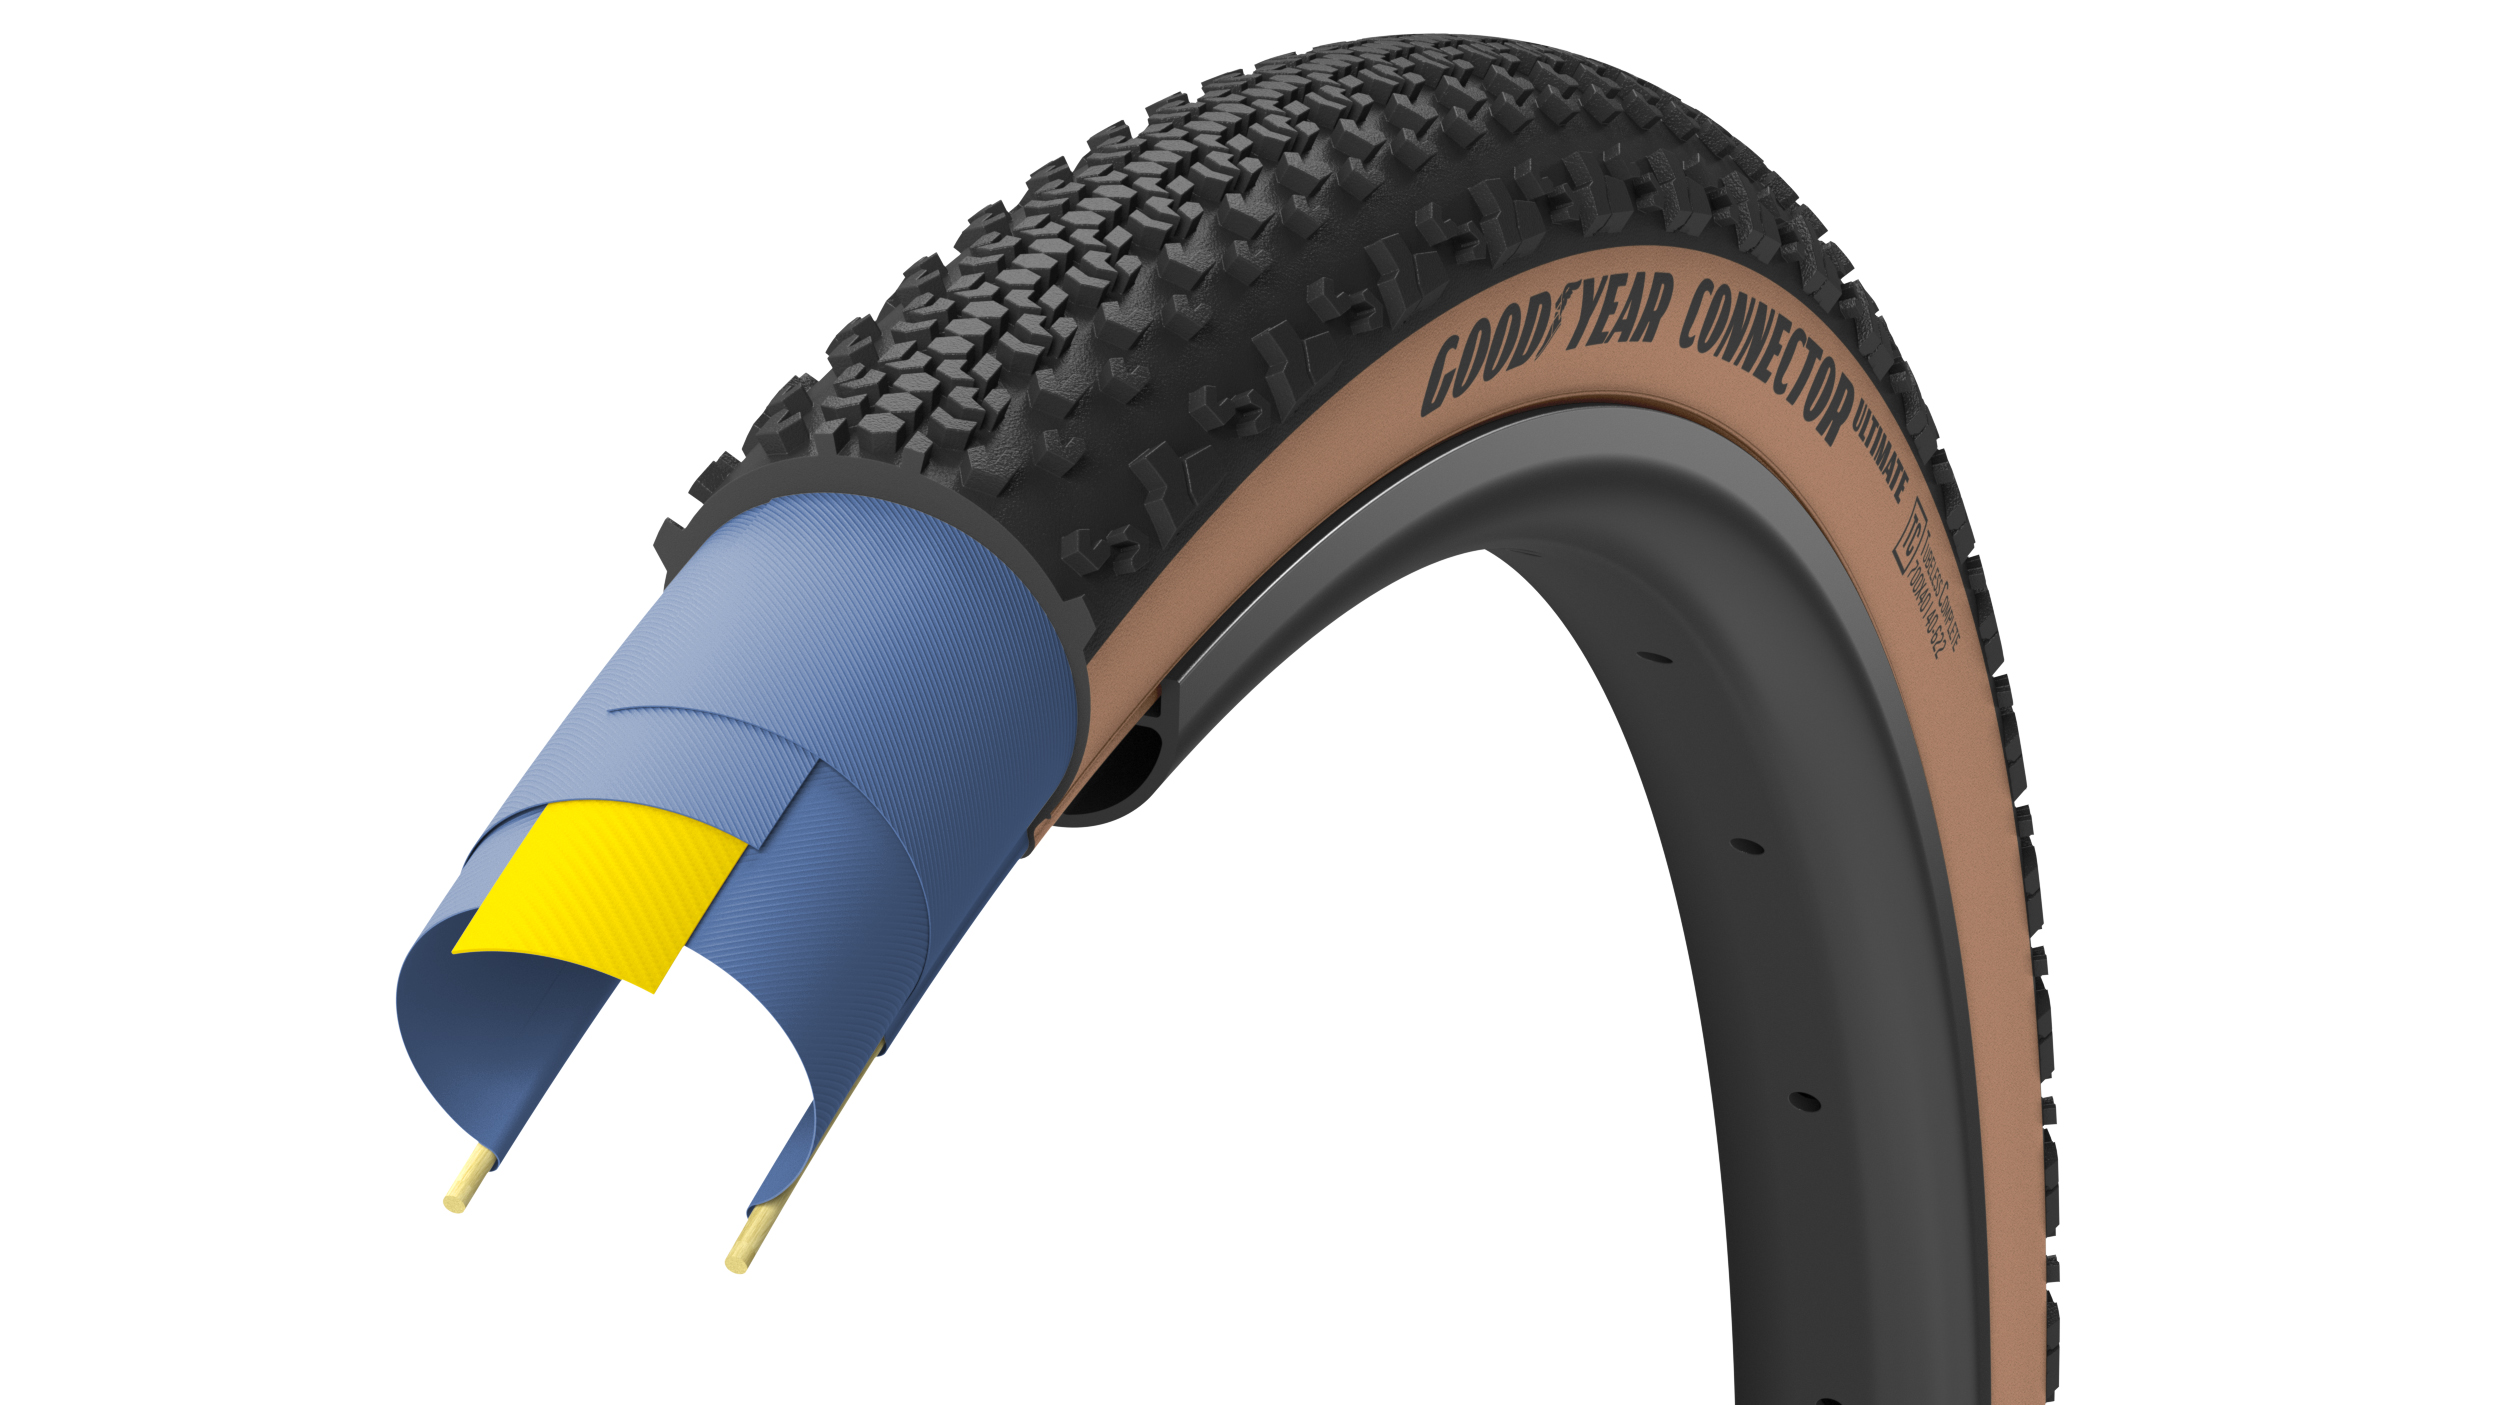 Покрышка 700x50 (50-622) GoodYear CONNECTOR Ultimate Tubeless Complete, Blk/Tan